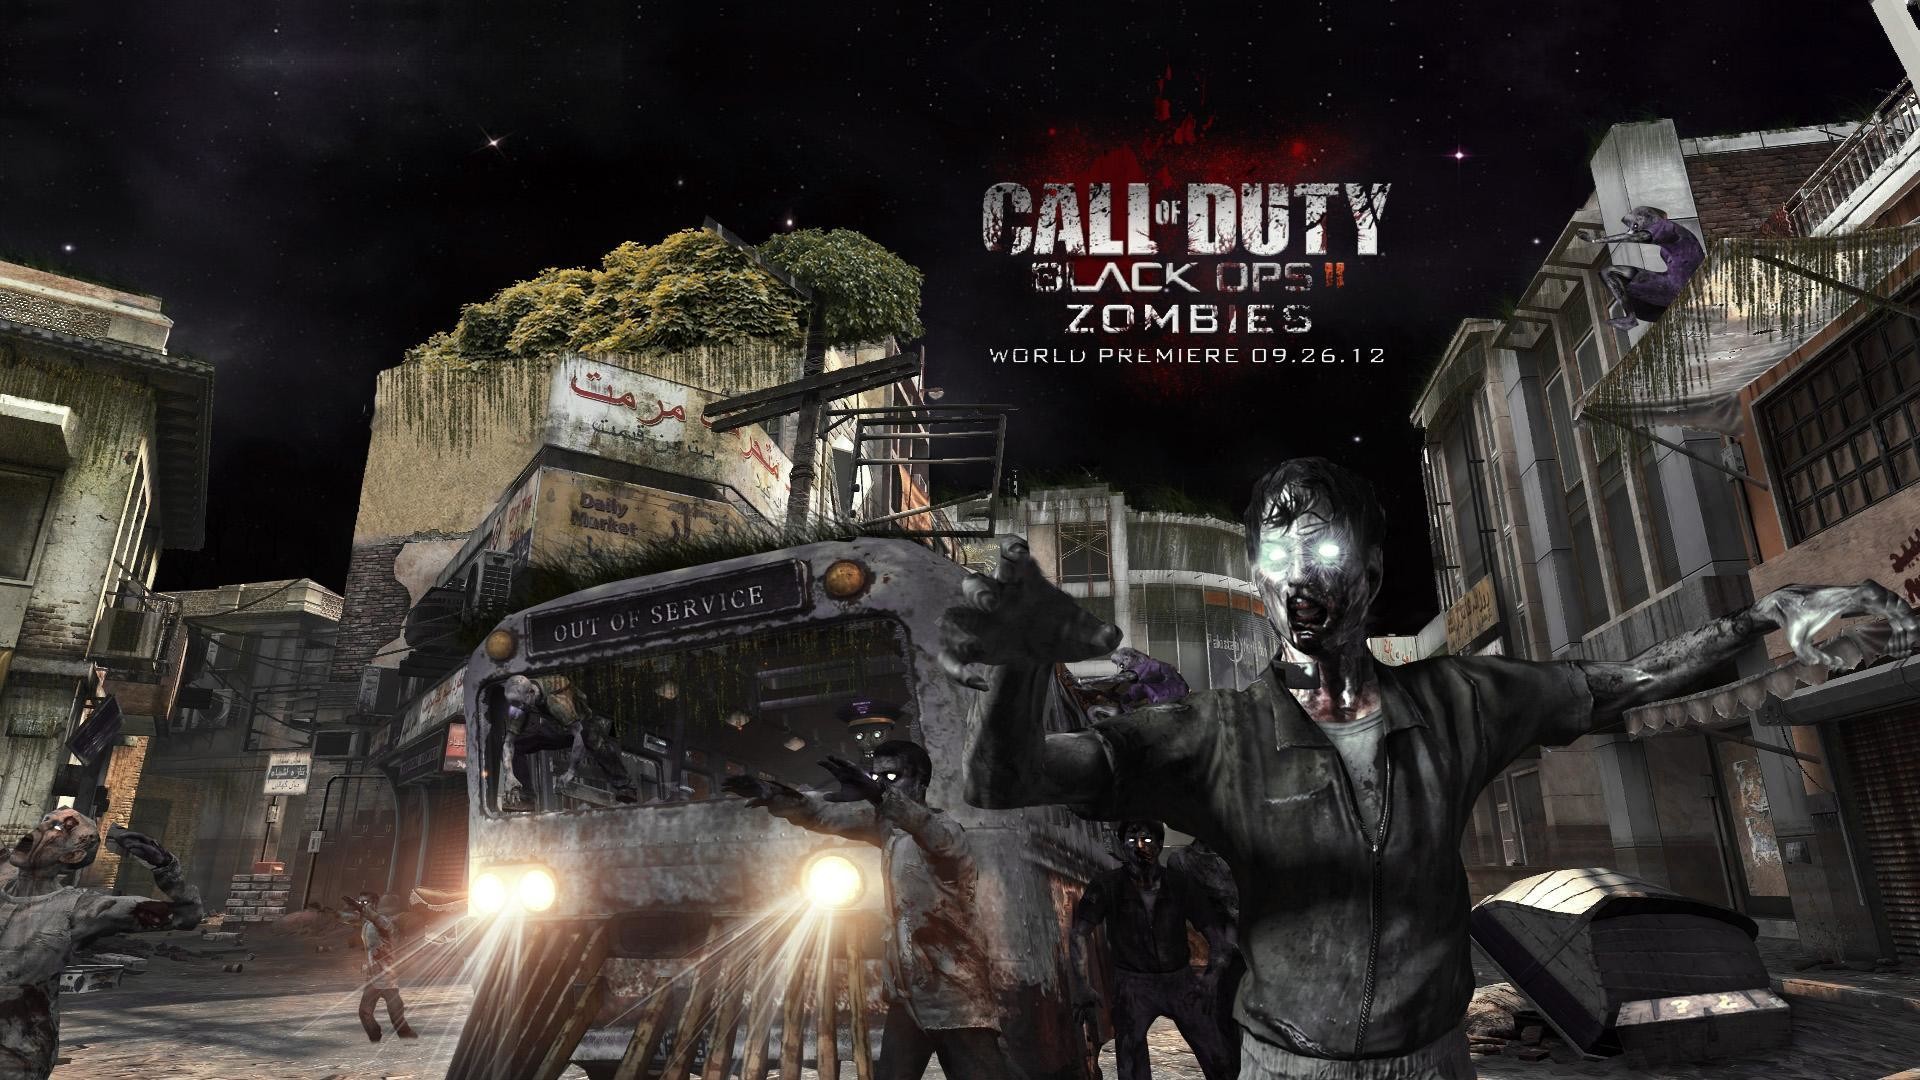 1920x1080 Call Of Duty Wallpapers Zombies Wallpapers) – HD Wallpapers